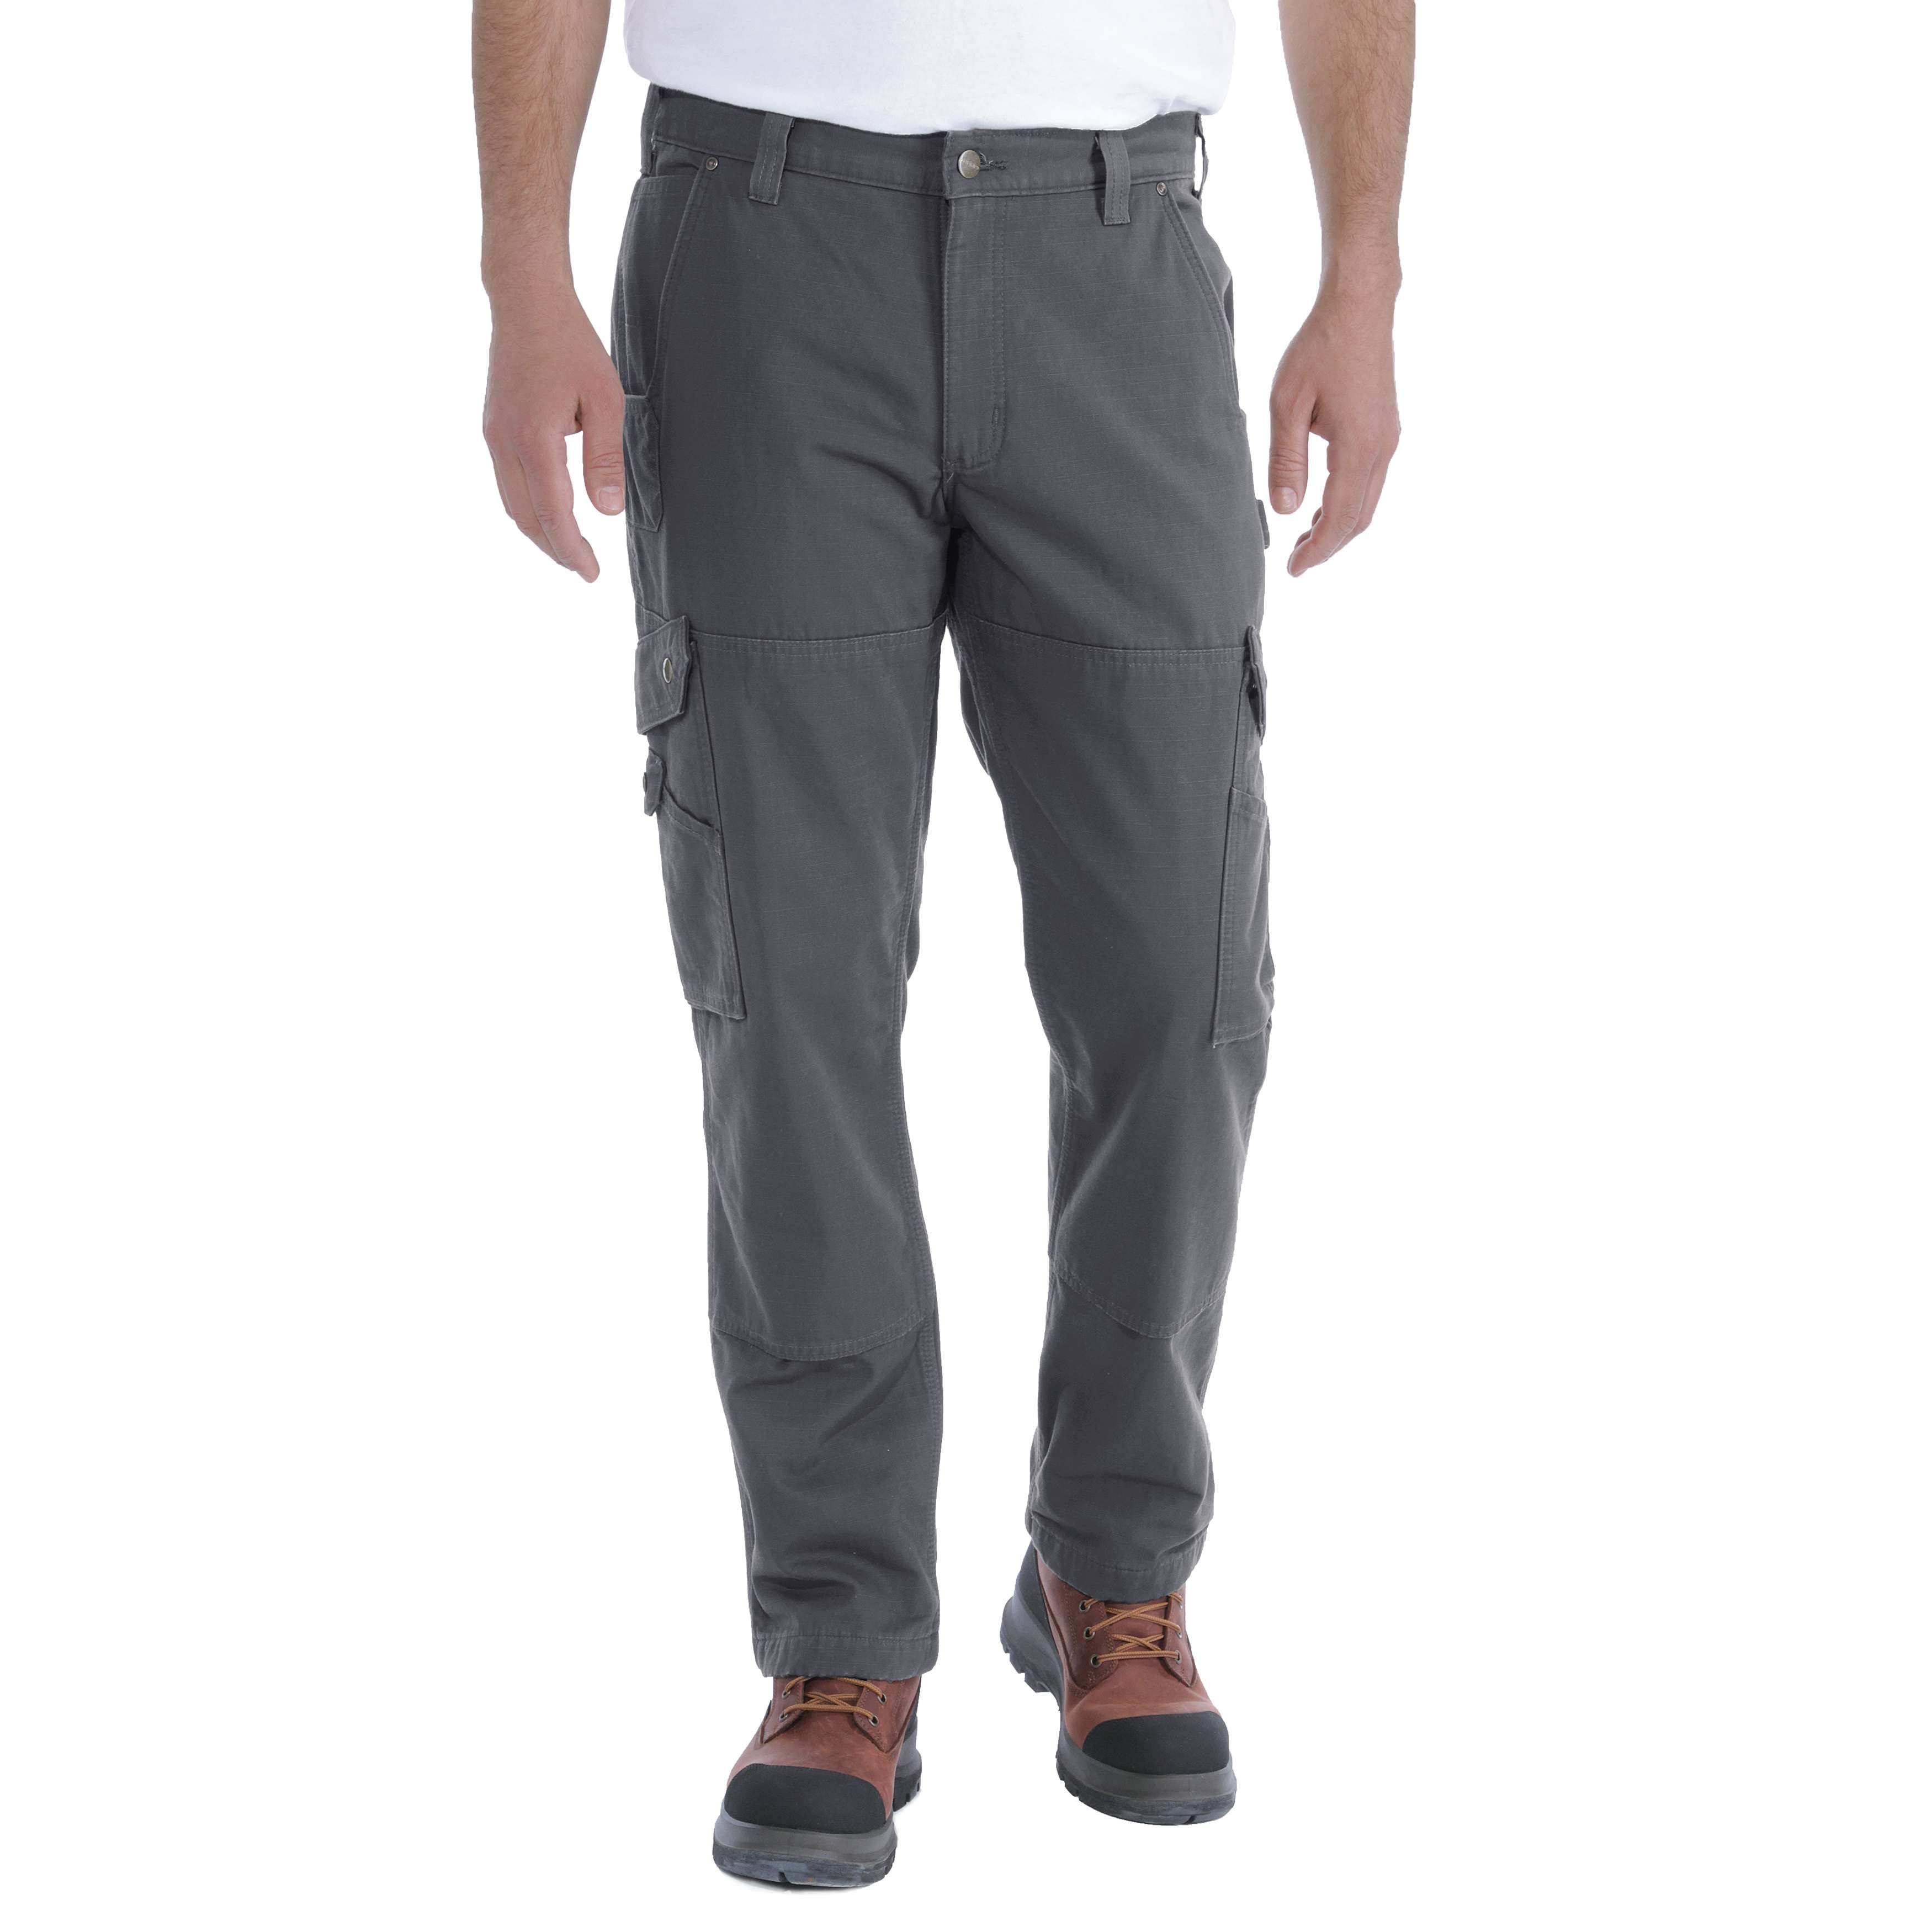 flannel lined cargo pants